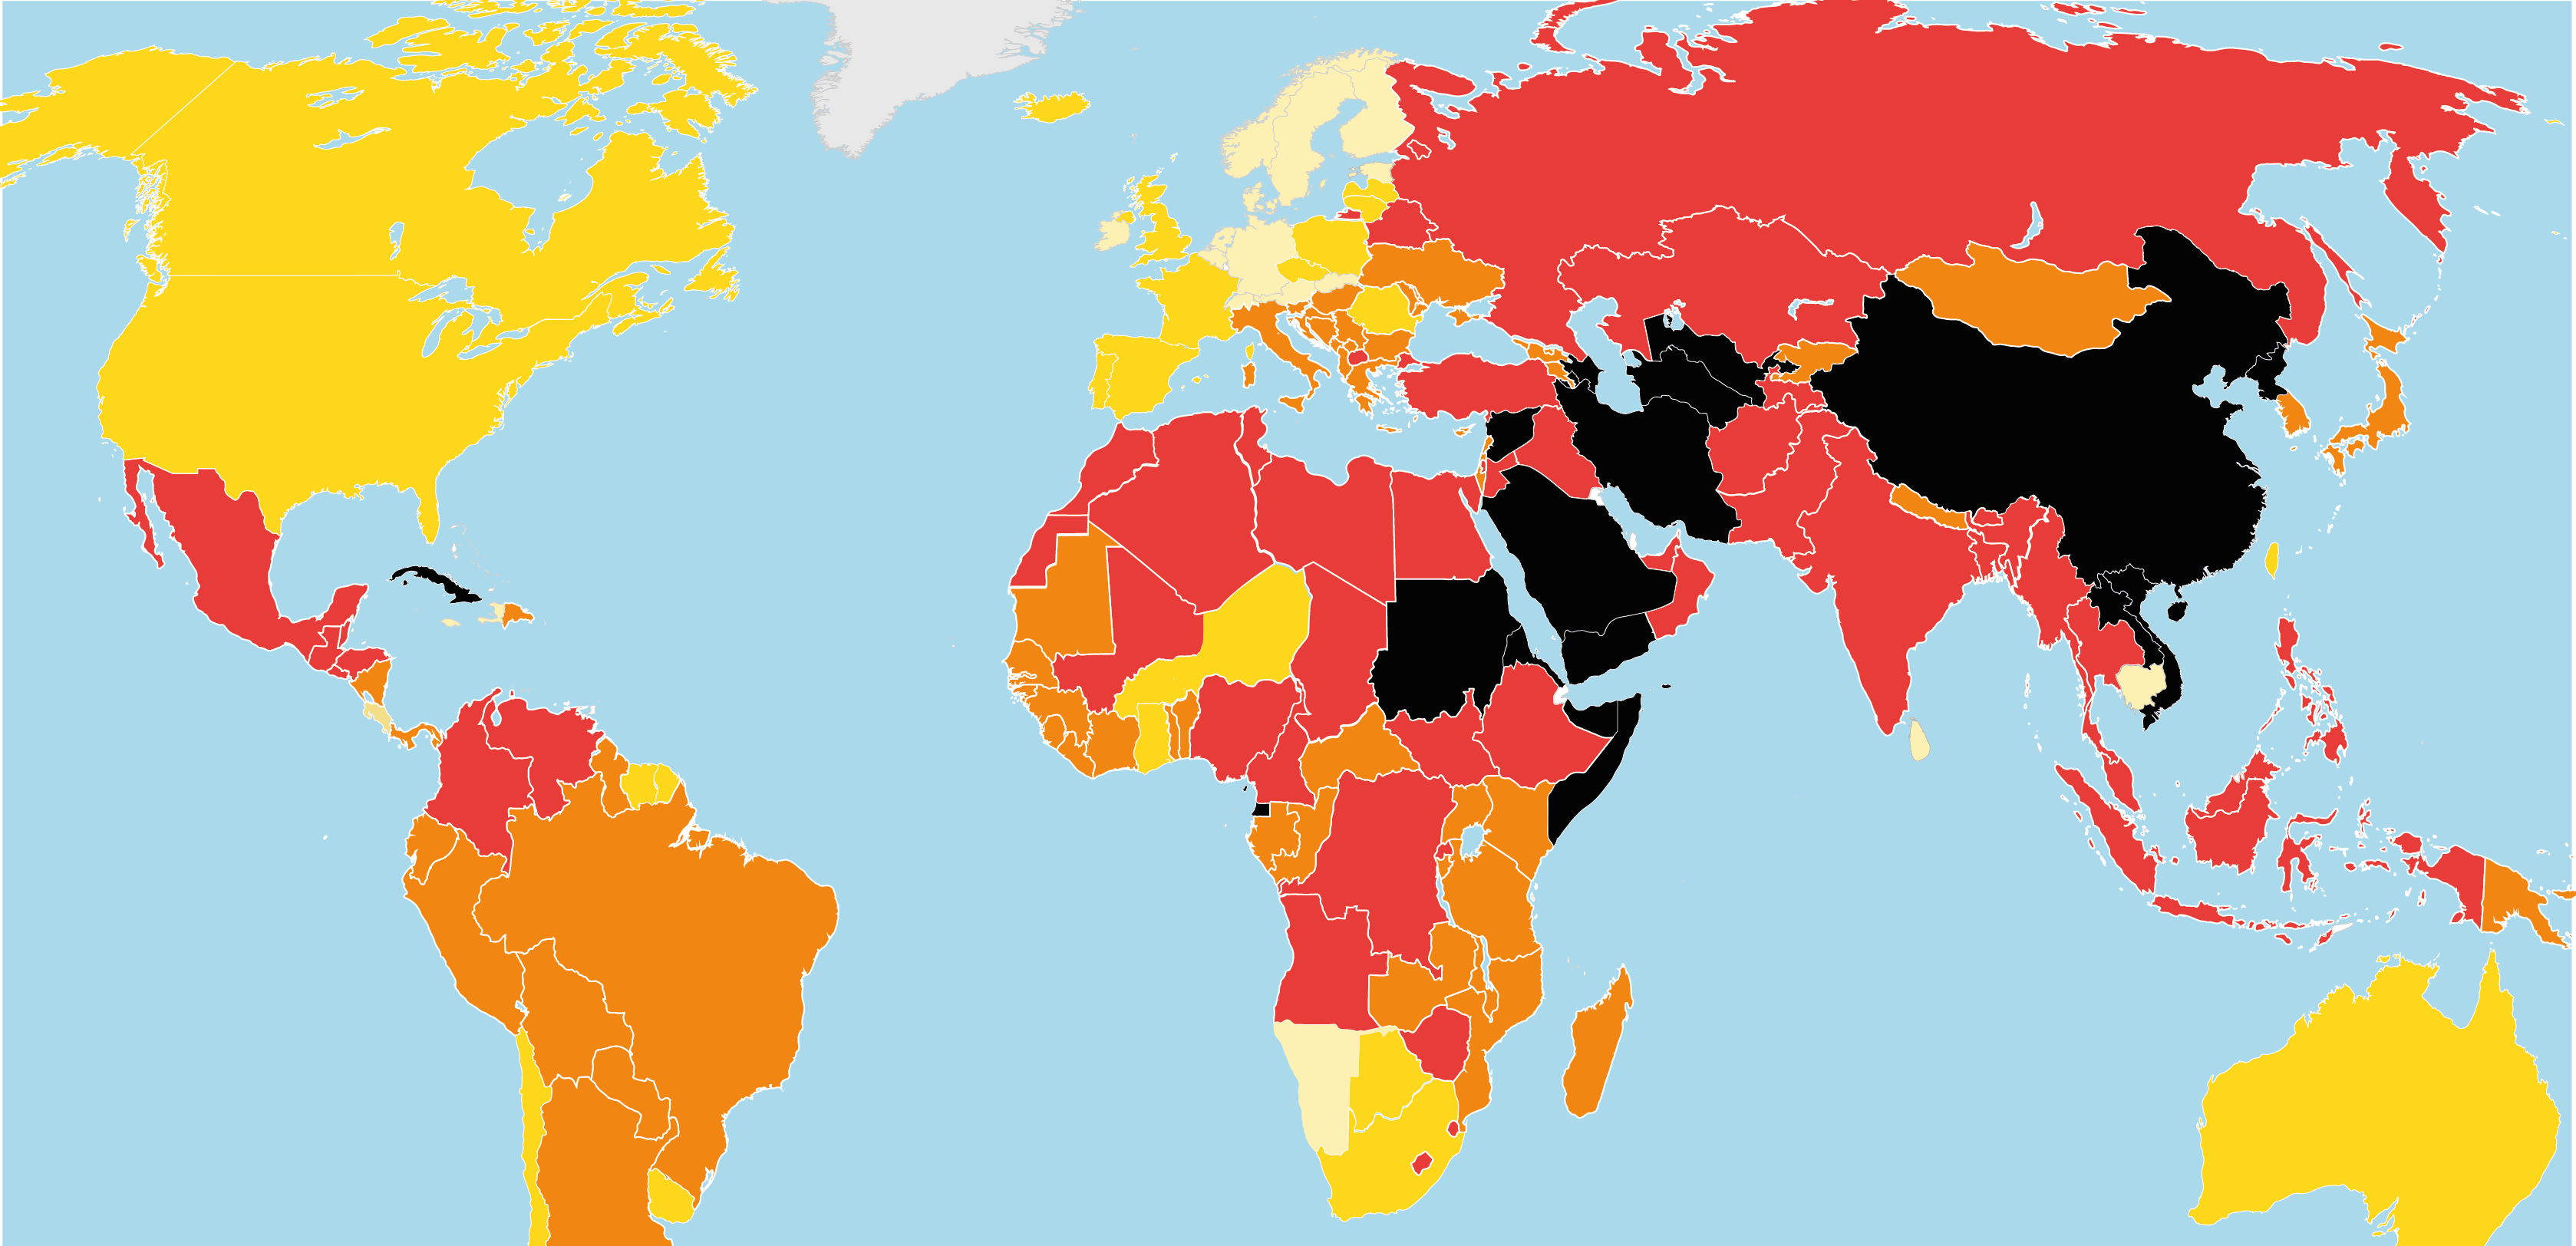 The World Press Freedom Index RSF